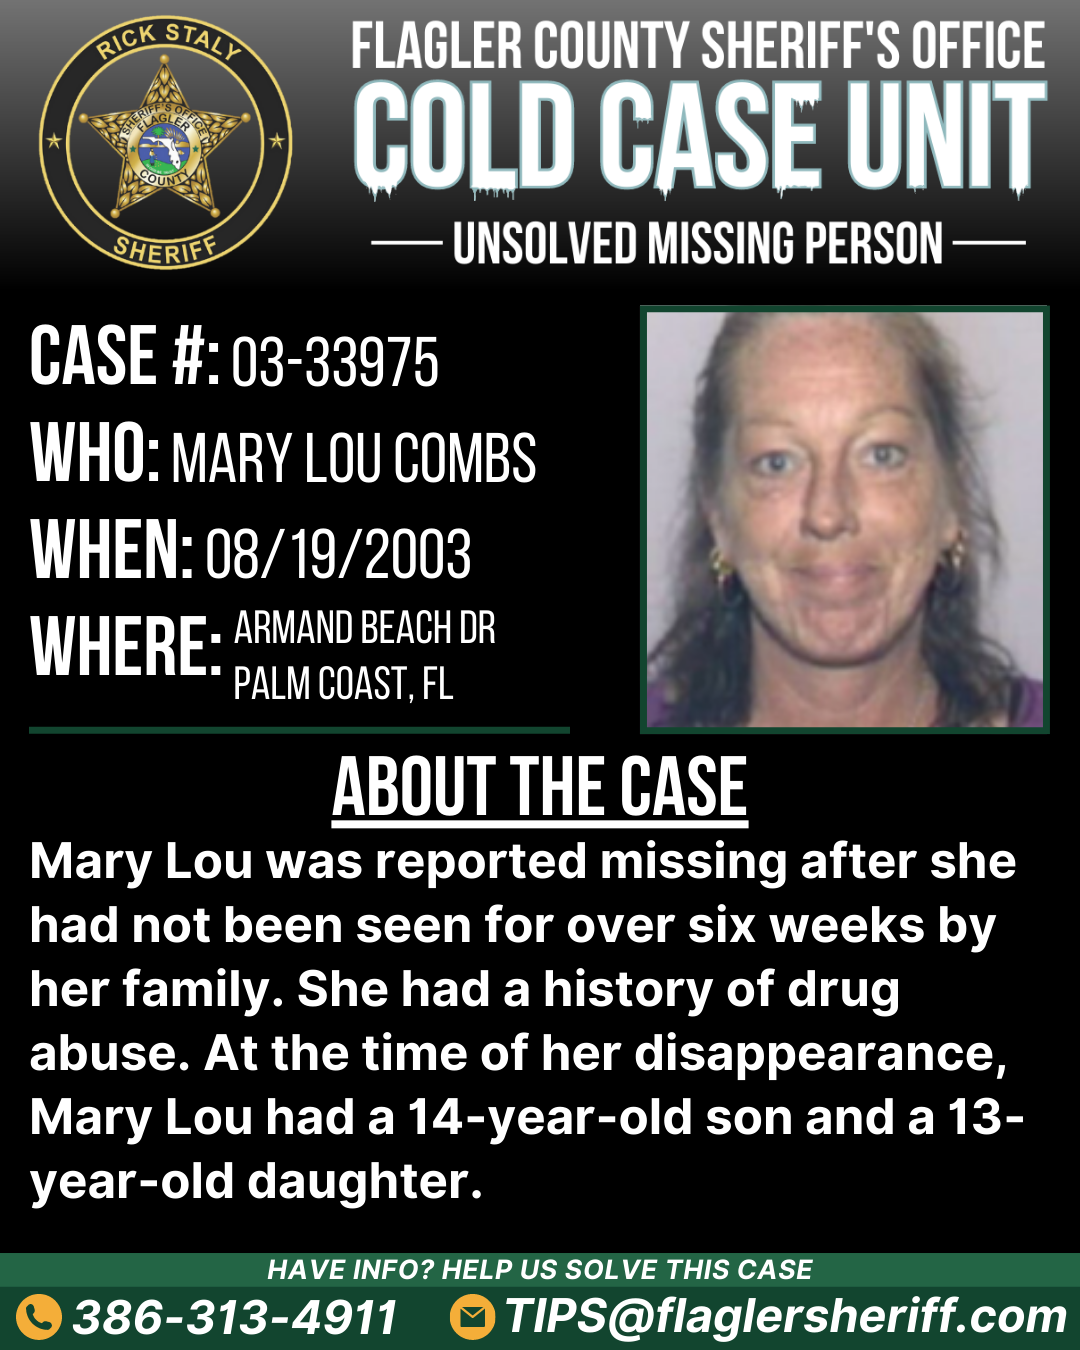 Case #03-33975. Missing Person. Who: Mary Lou Combs. When: 08/19/2003. Where: Armand Beach Drive (Palm Coast, FL). About the case: Mary Lou was reported missing after she had not been seen for over six weeks by her family. She had a history of drug abuse. At the time of her disappearance, Mary Lou had a 14-year-old son and a 13-year-old daughter.